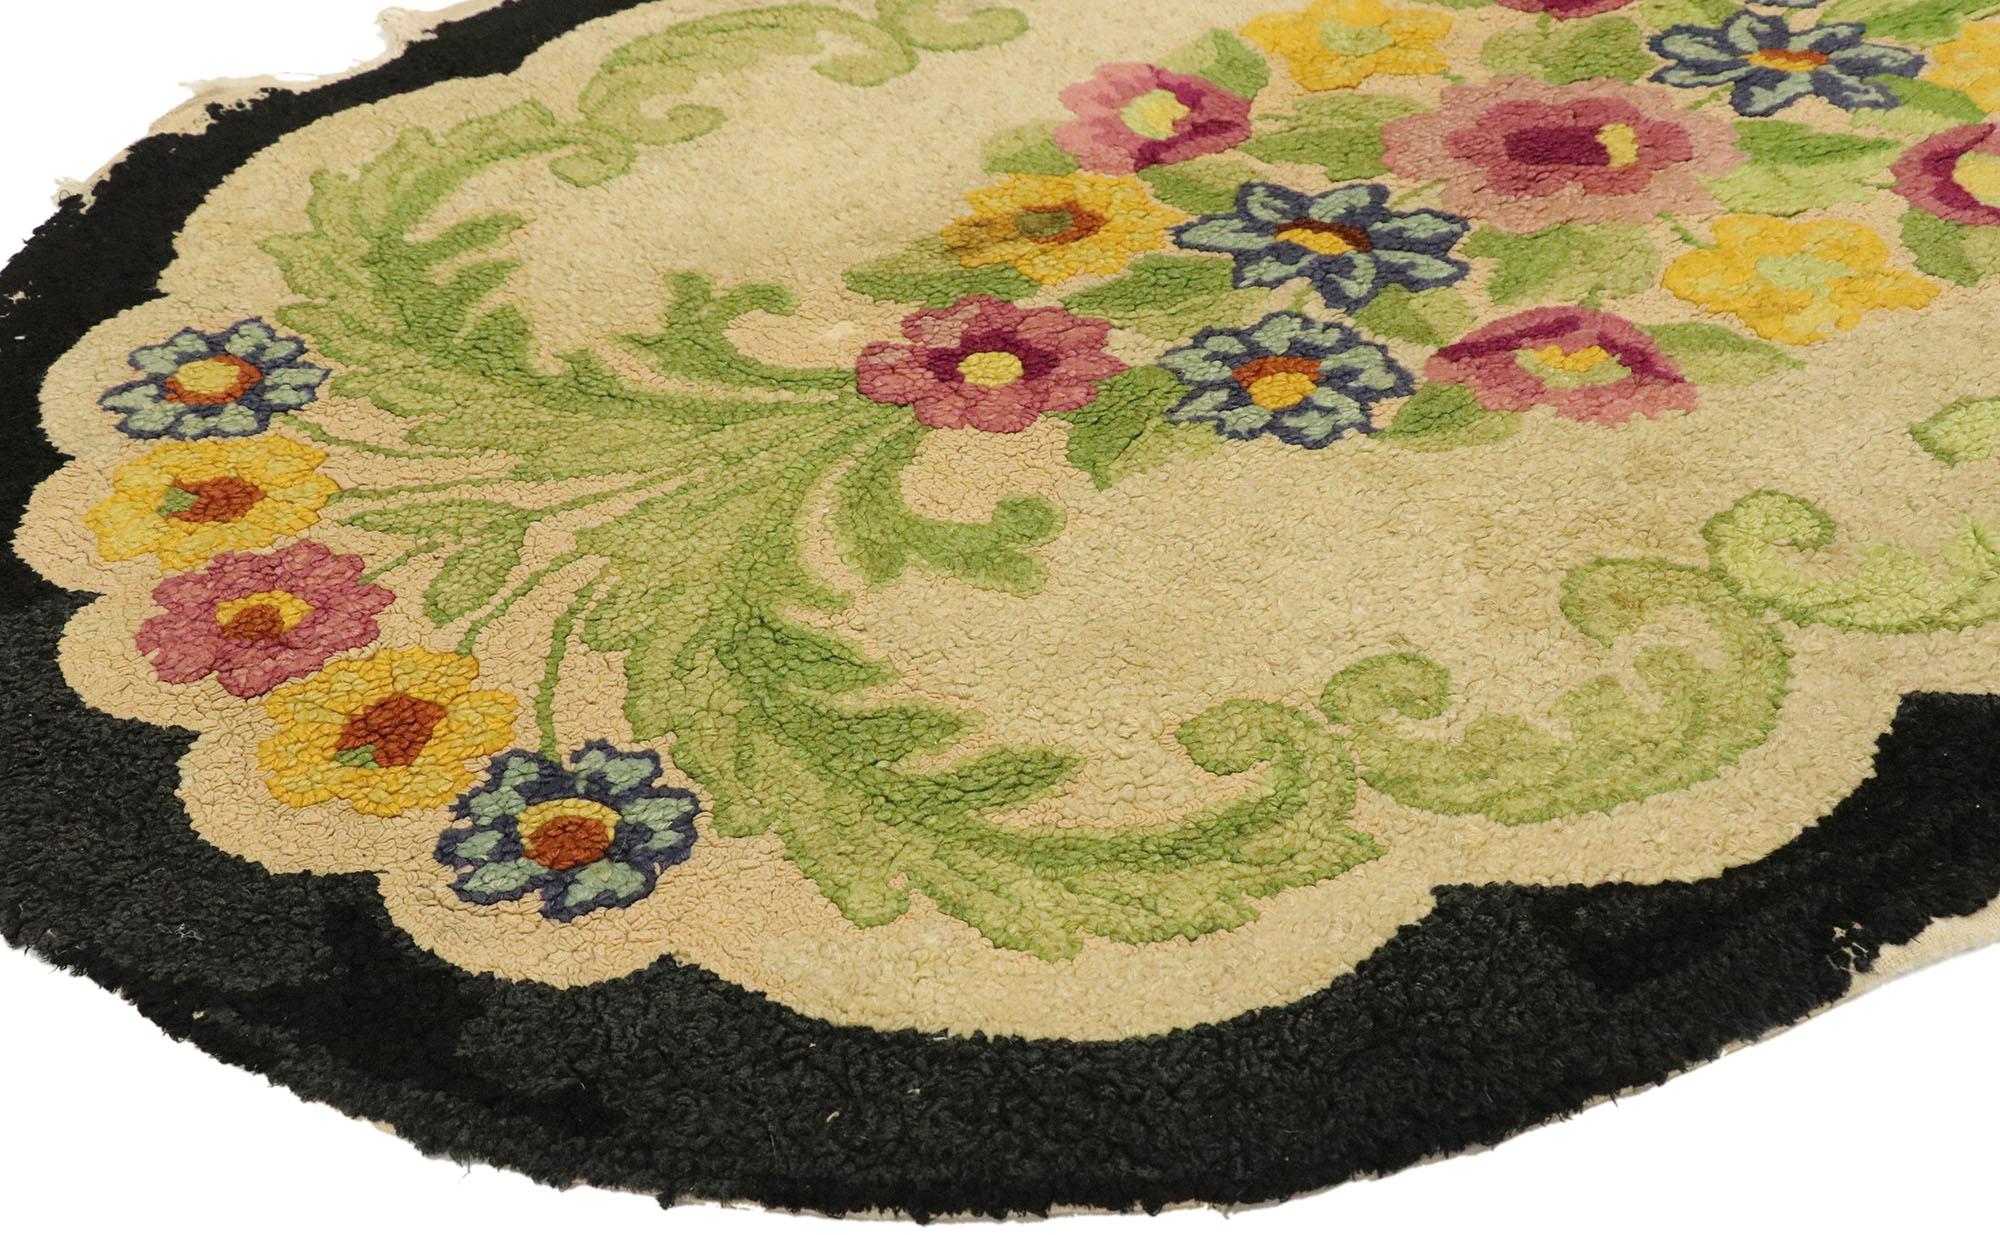 74346, antique American floral hooked oval rug with English Country Chintz style8. Drawing inspiration from Mario Buatta, Chintz style and design elements from the 18th century in France, this antique American floral hooked rug with English Country